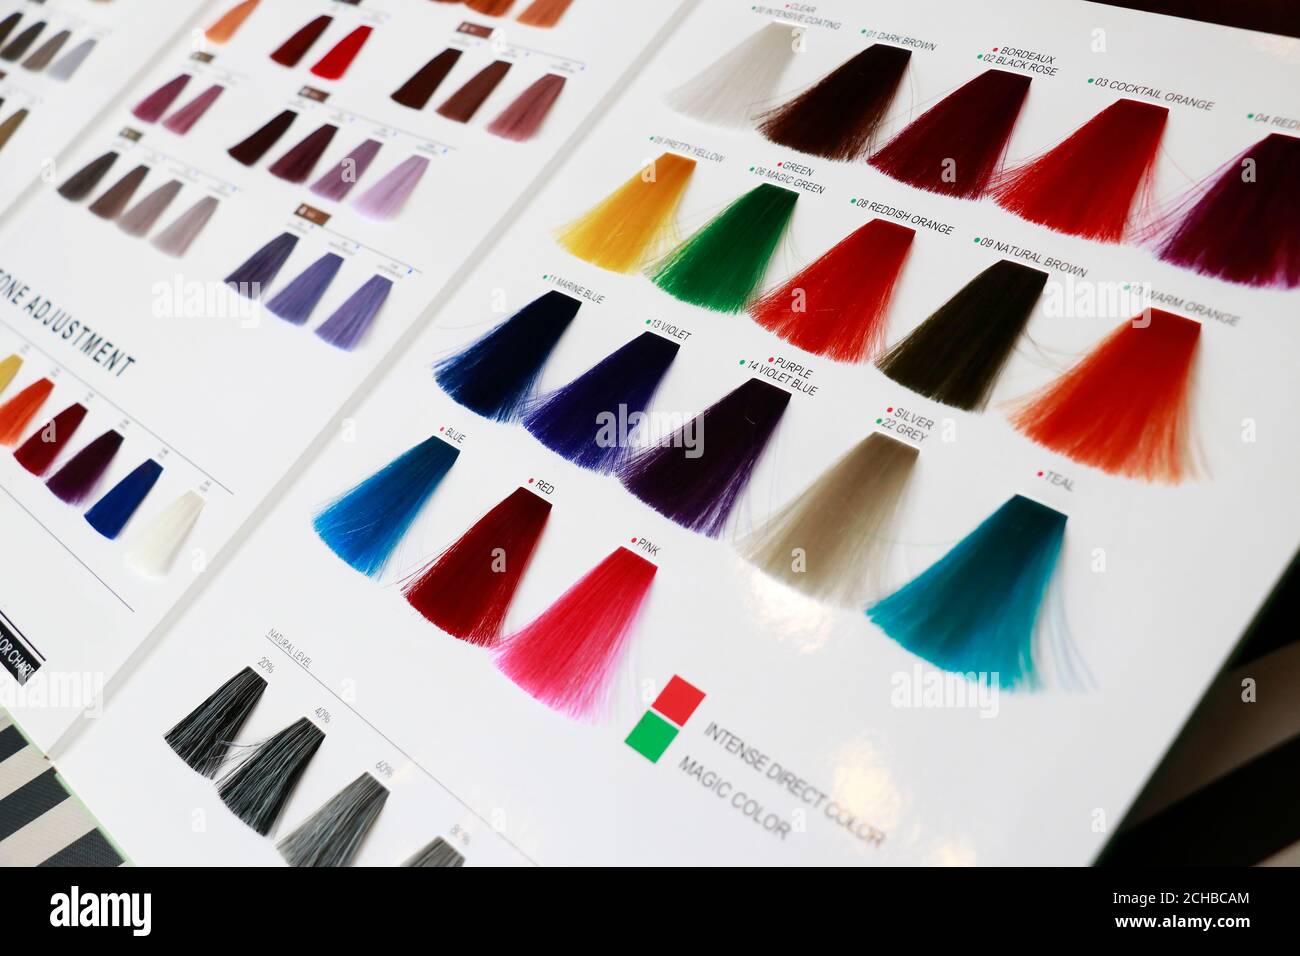 a hair color chart display some abnormal example color such as blue, pink,  green, orange and violet ect Stock Photo - Alamy